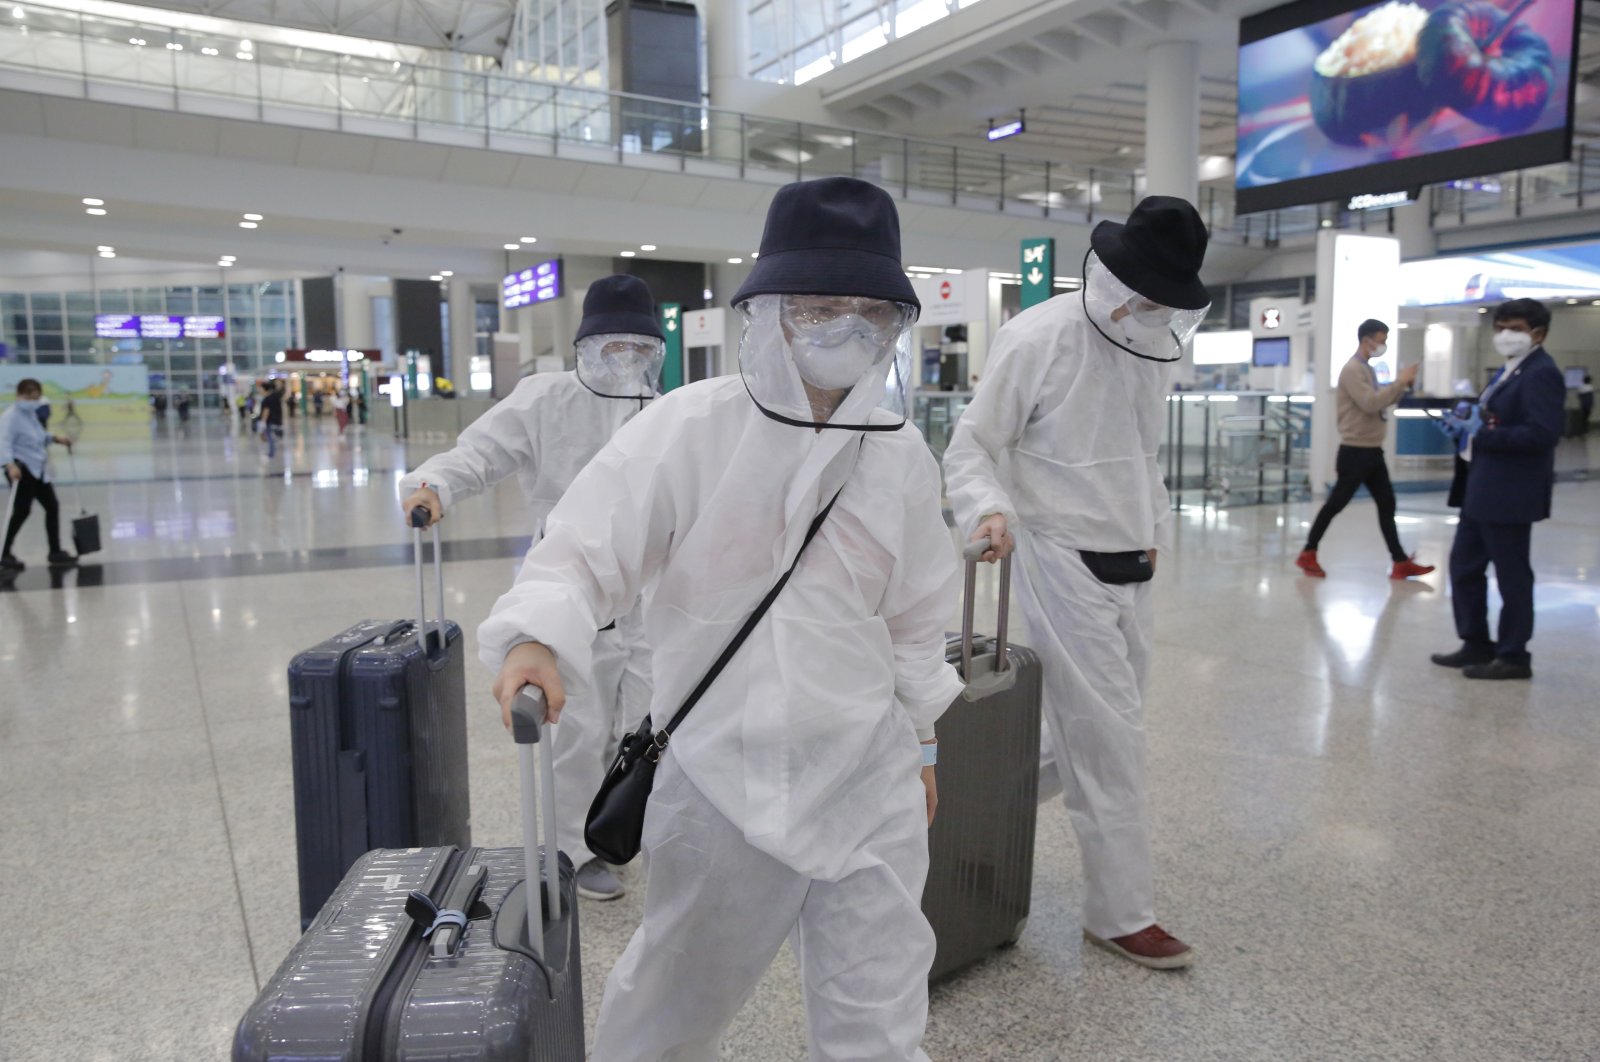 Passengers wear suits and face masks to protect against the coronavirus as they arrive at the Hong Kong airport, Monday, March 23, 2020. (AP Photo)